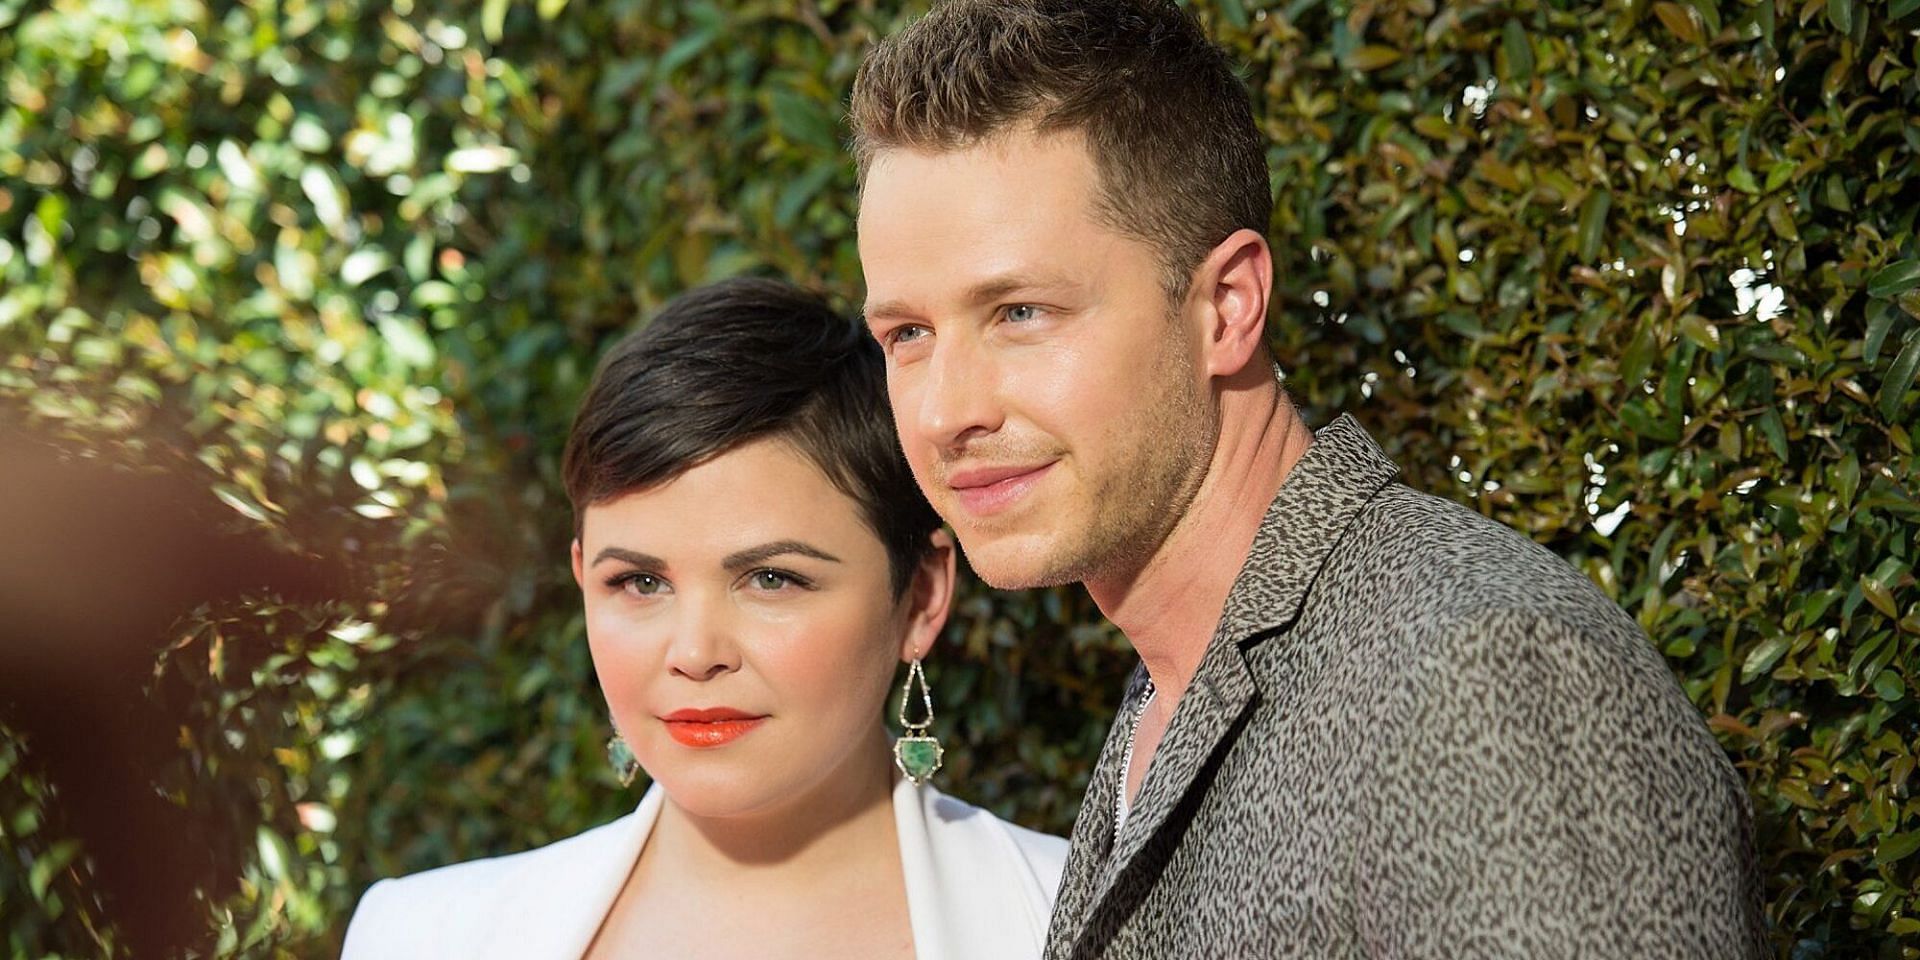 Ginnifer Goodwin revealed that she offered her good friend her husband Josh Dallas&#039; sperm to procreate (Image via Getty Images/ Jennifer Lourie)